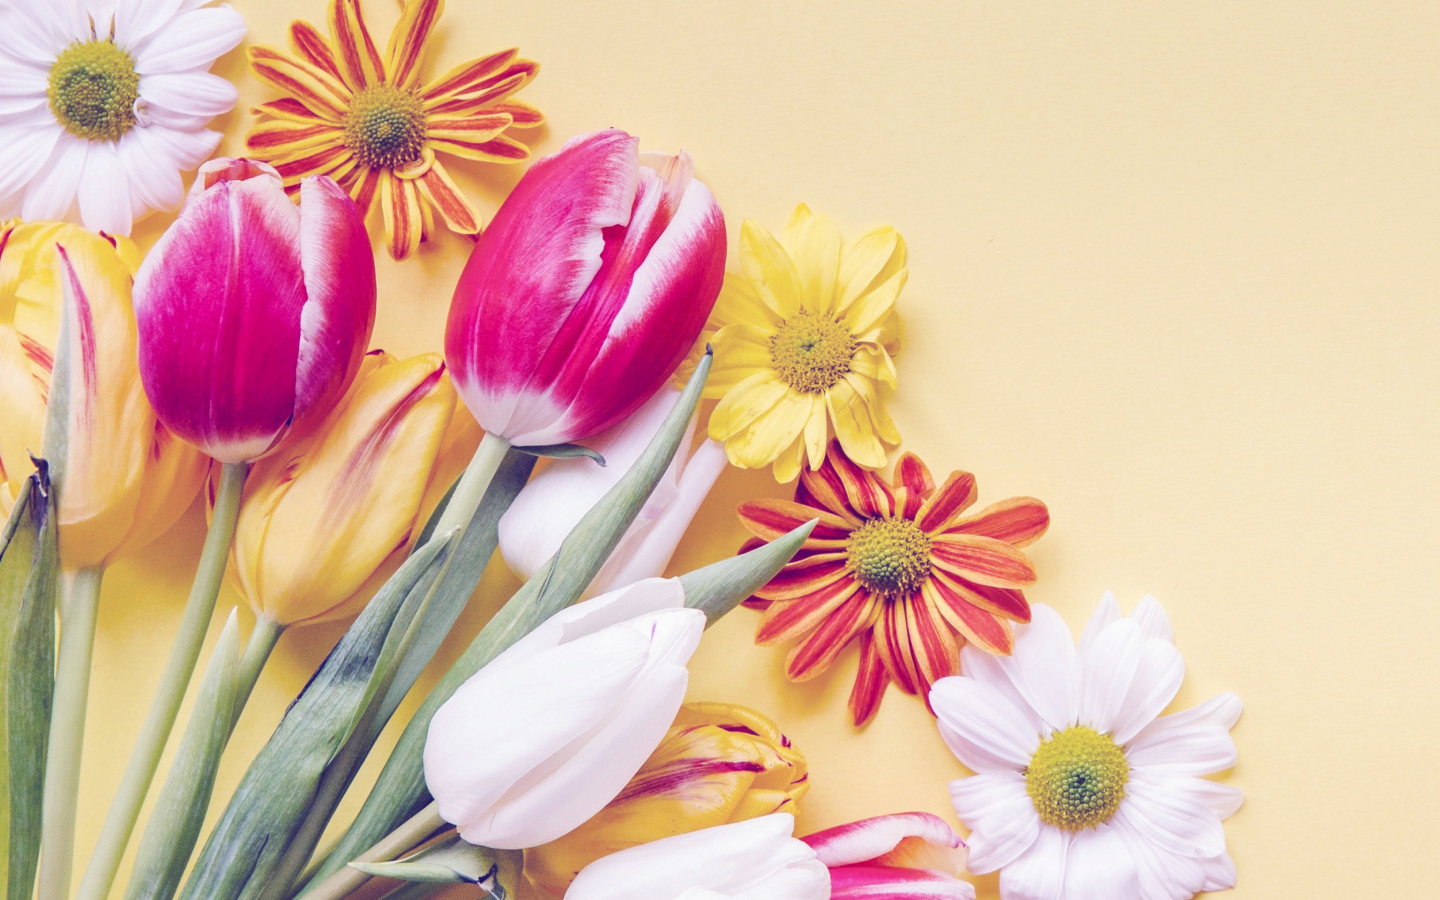 Spring tulips on yellow background wallpaper 1440x900